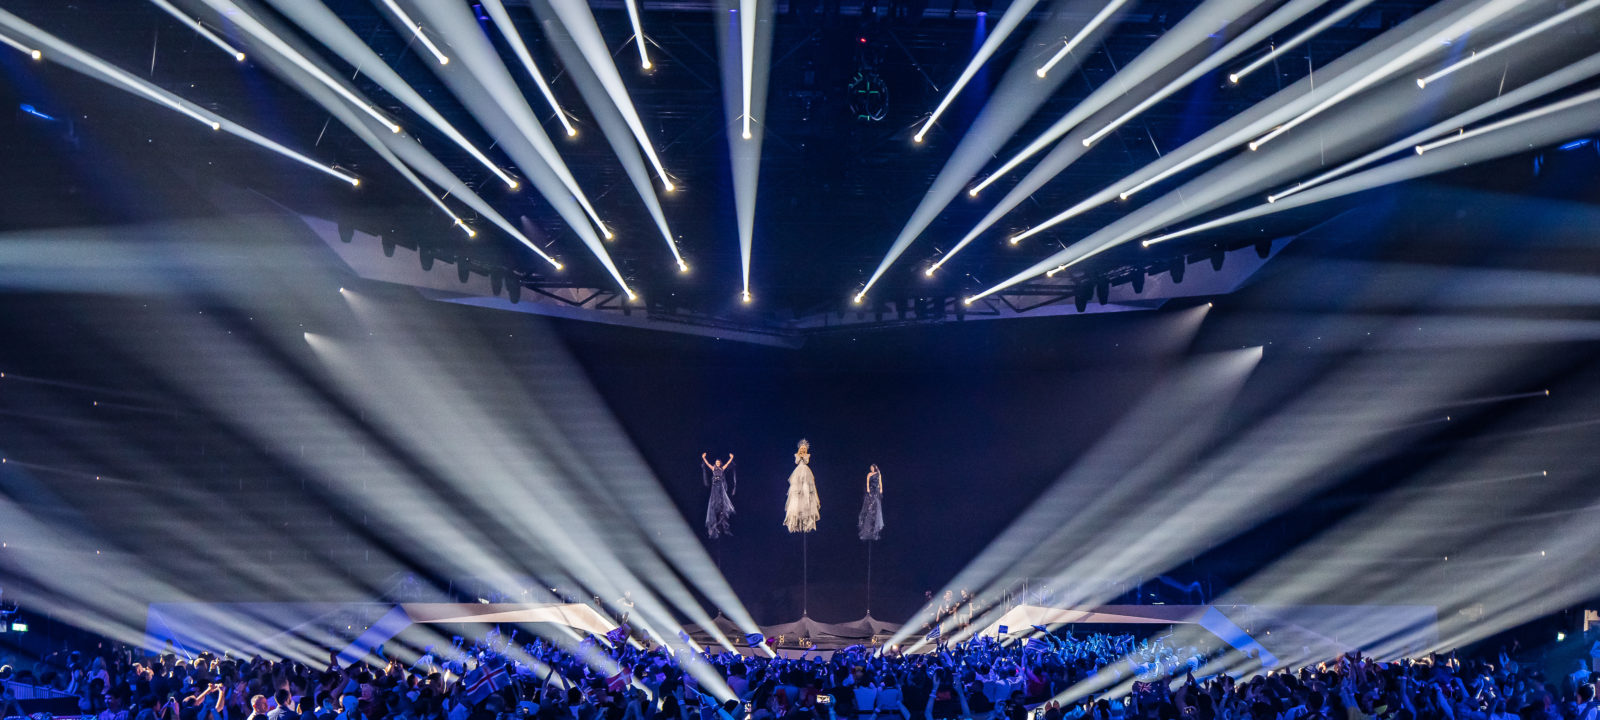 Ayrton Lighting Plays Major Role at Eurovision Song Contest 2019 | Ayrton